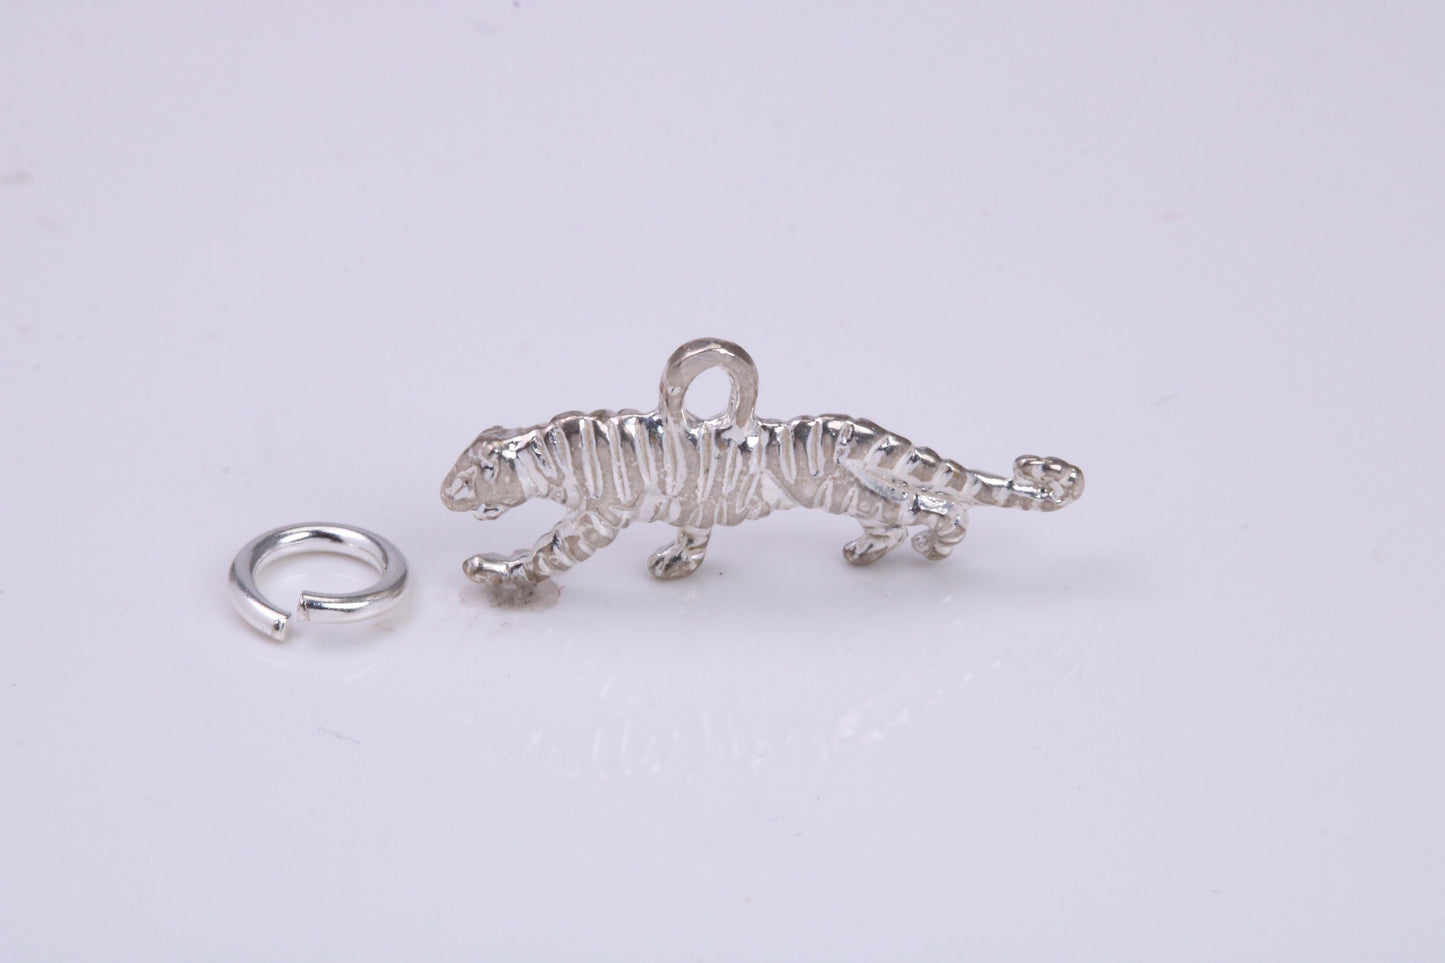 Tiger Charm, Traditional Charm, Made from Solid 925 Grade Sterling Silver, Complete with Attachment Link